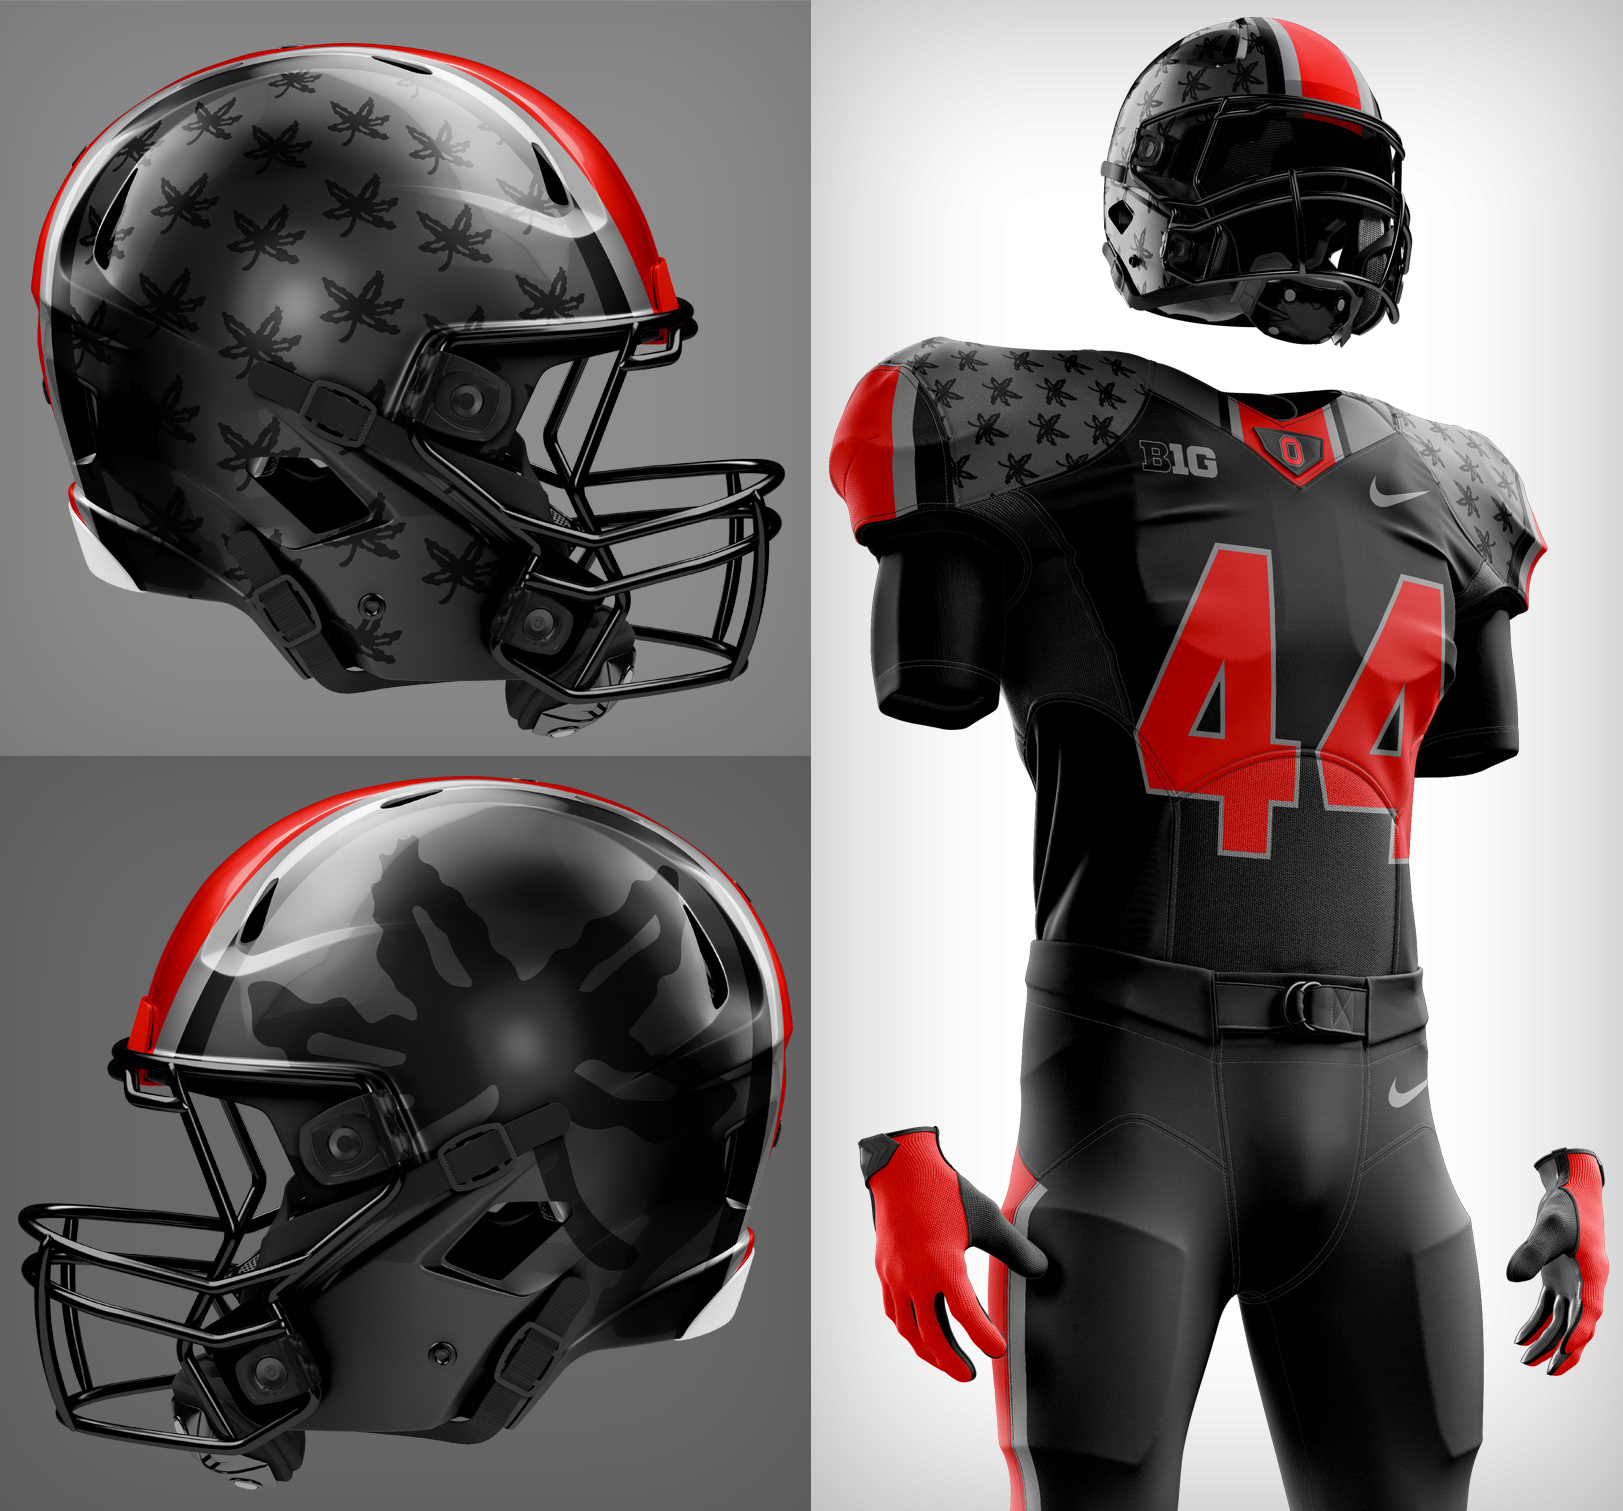 Ohio State alternate jersey concept inspired by marching band uniforms